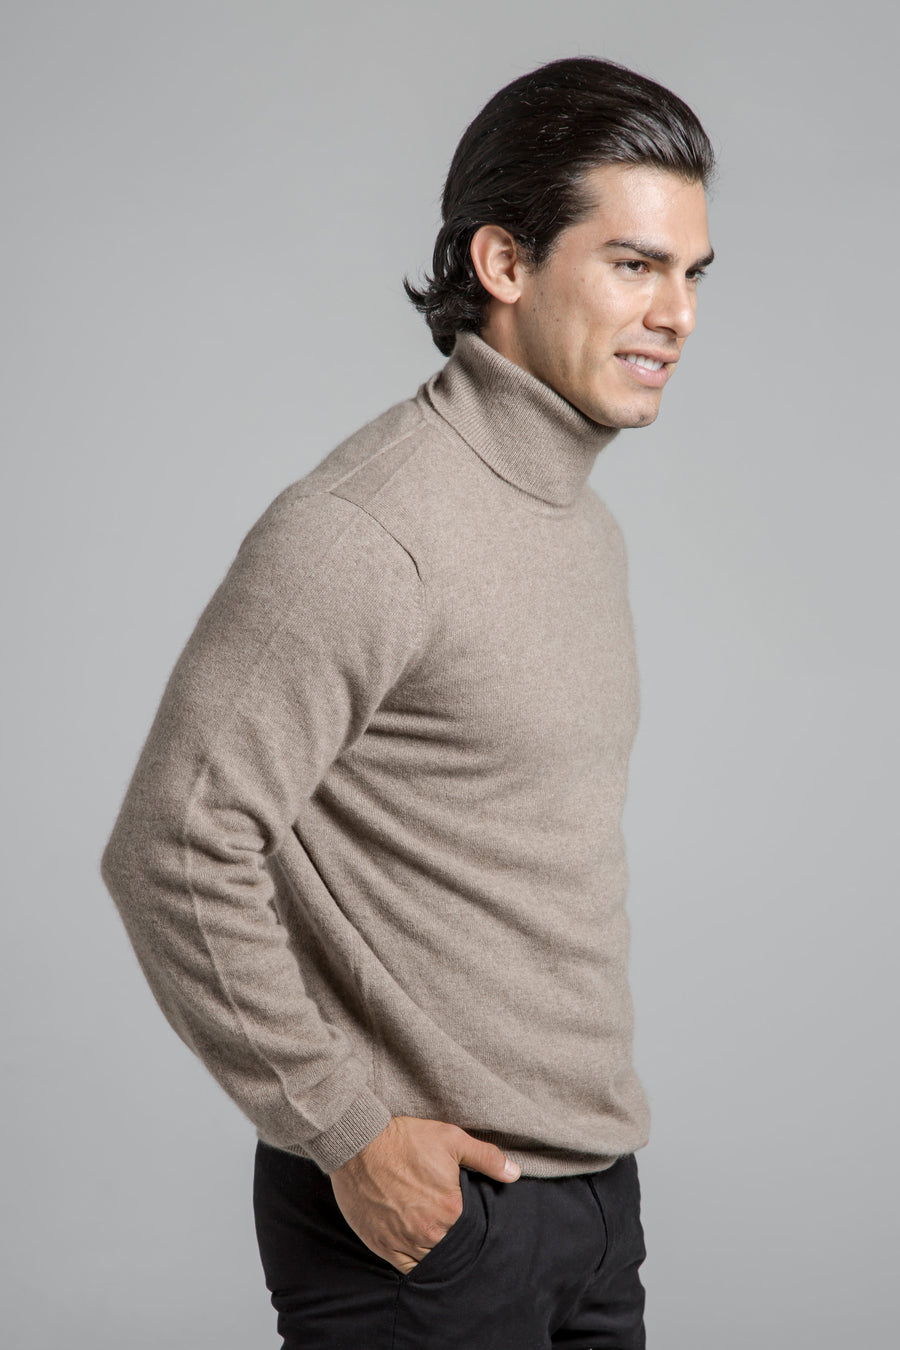 pine cashmere mens classic 100% pure organic cashmere turtleneck sweater in brown